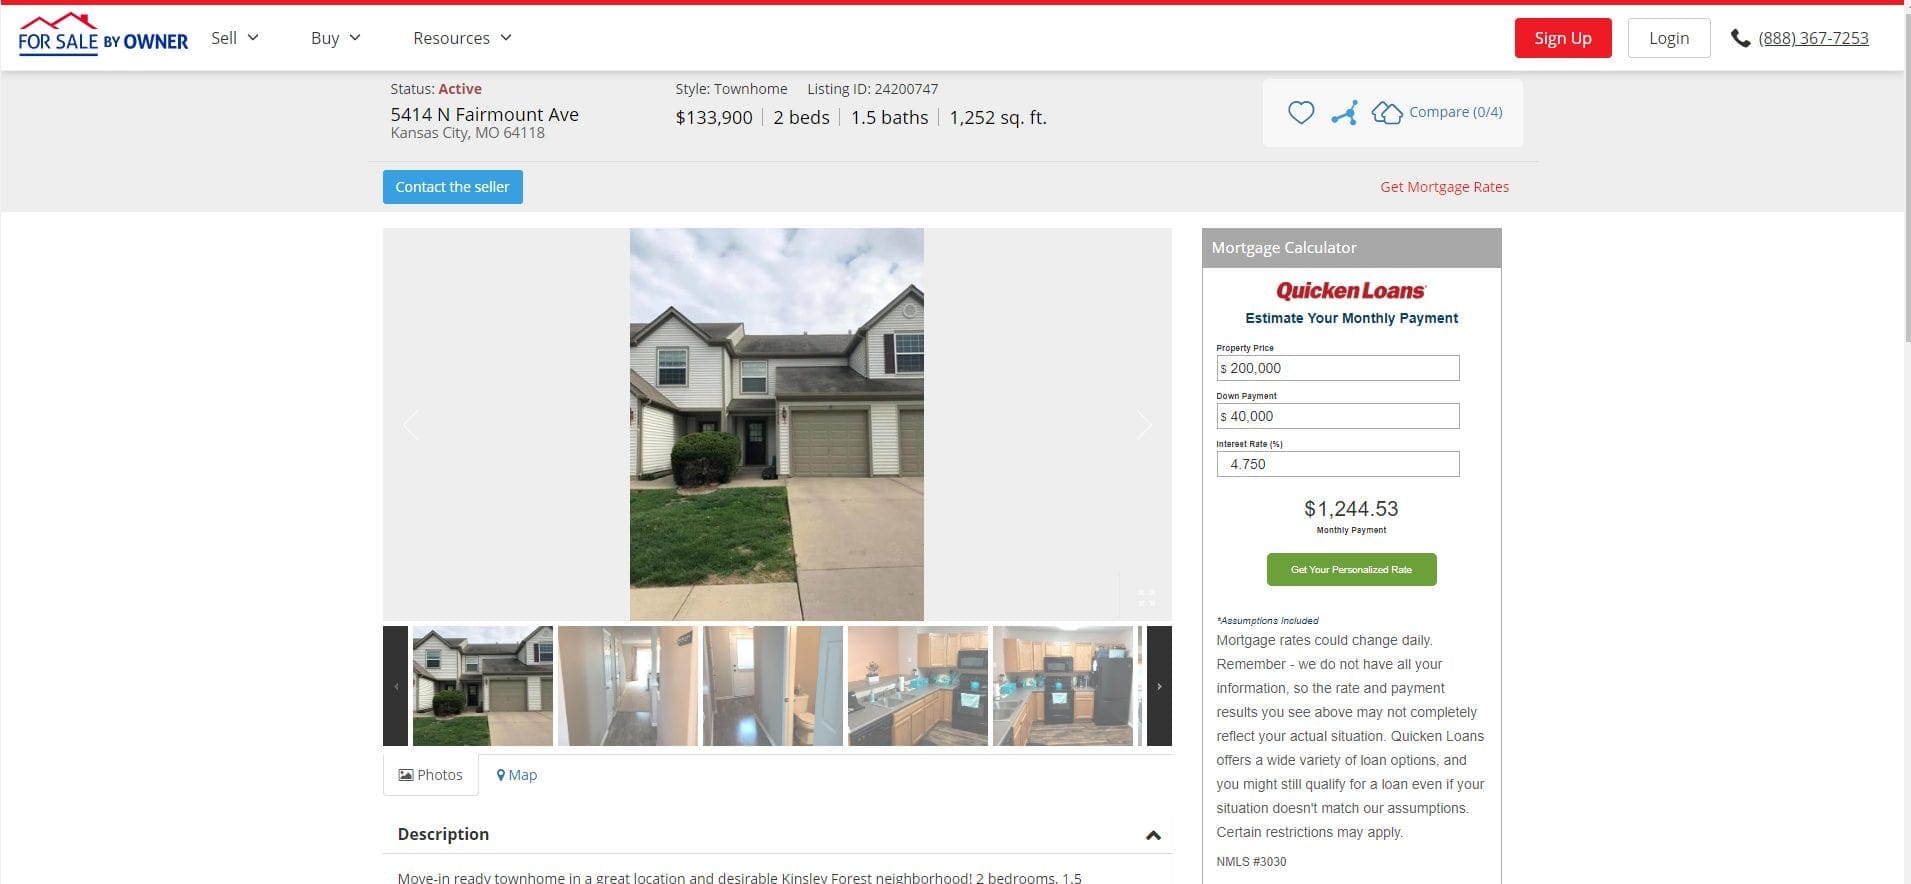 Buying a duplex on for sale by owner dot com